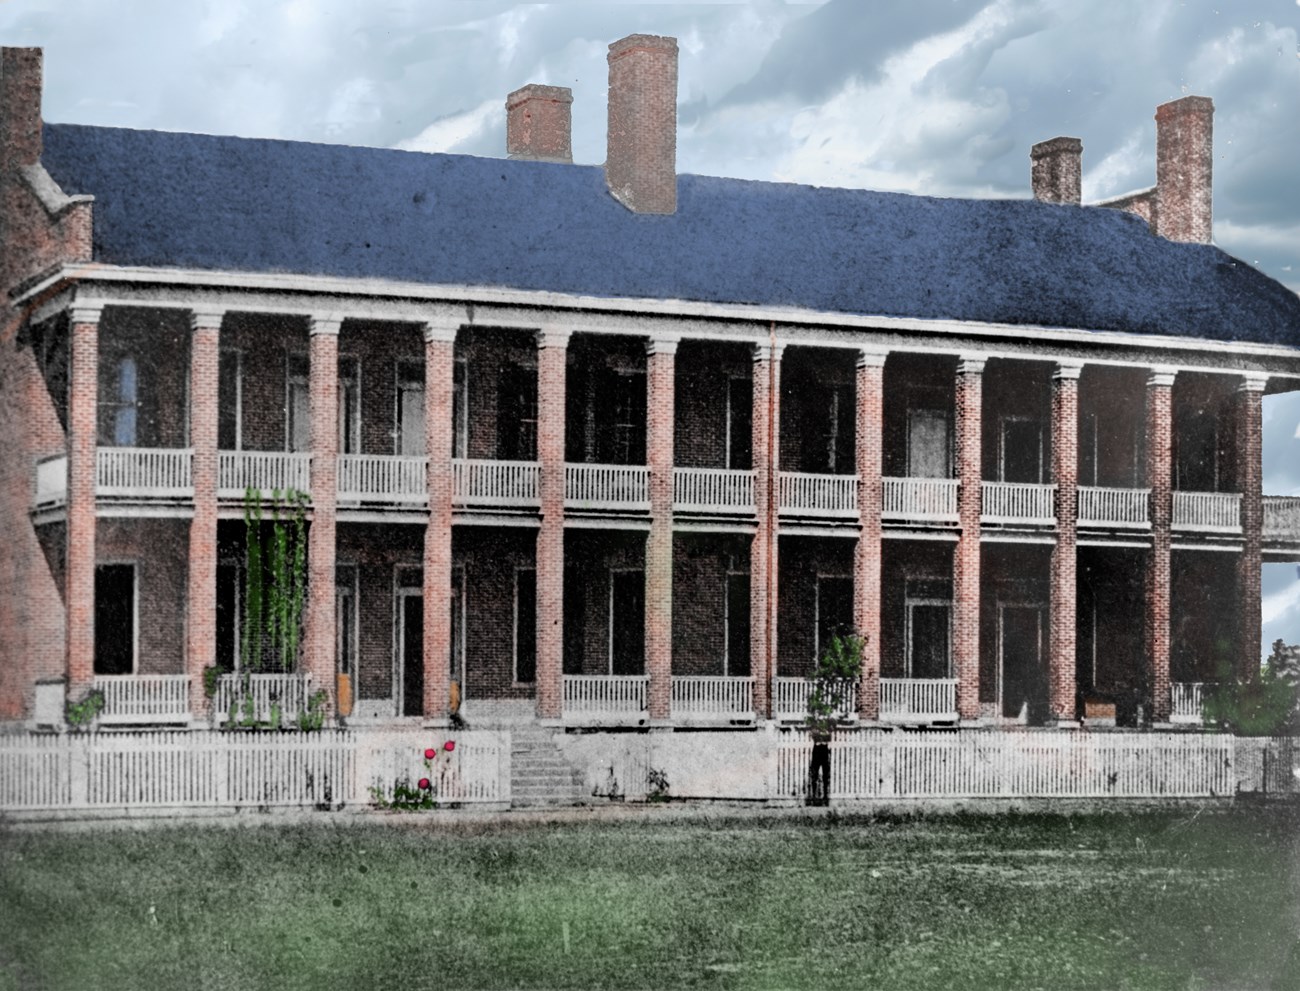 Colorized historic photo of two story red brick building with balcony and porch spanning the length of the building.